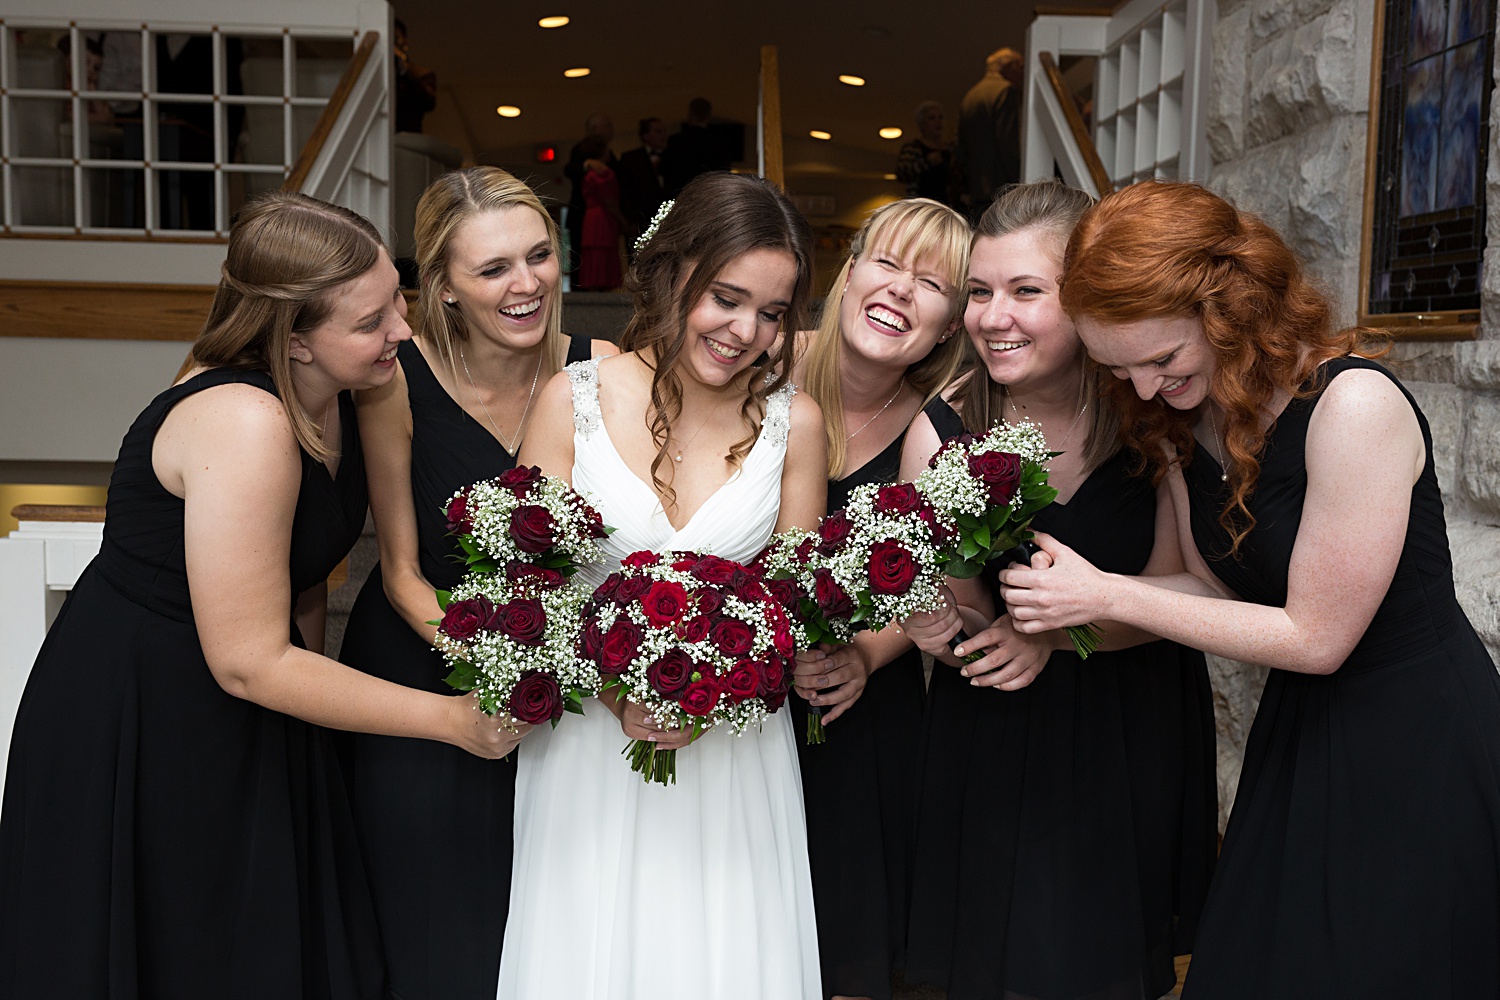 Wedding Party fun images at United Methodist Church in Lawrence, KS